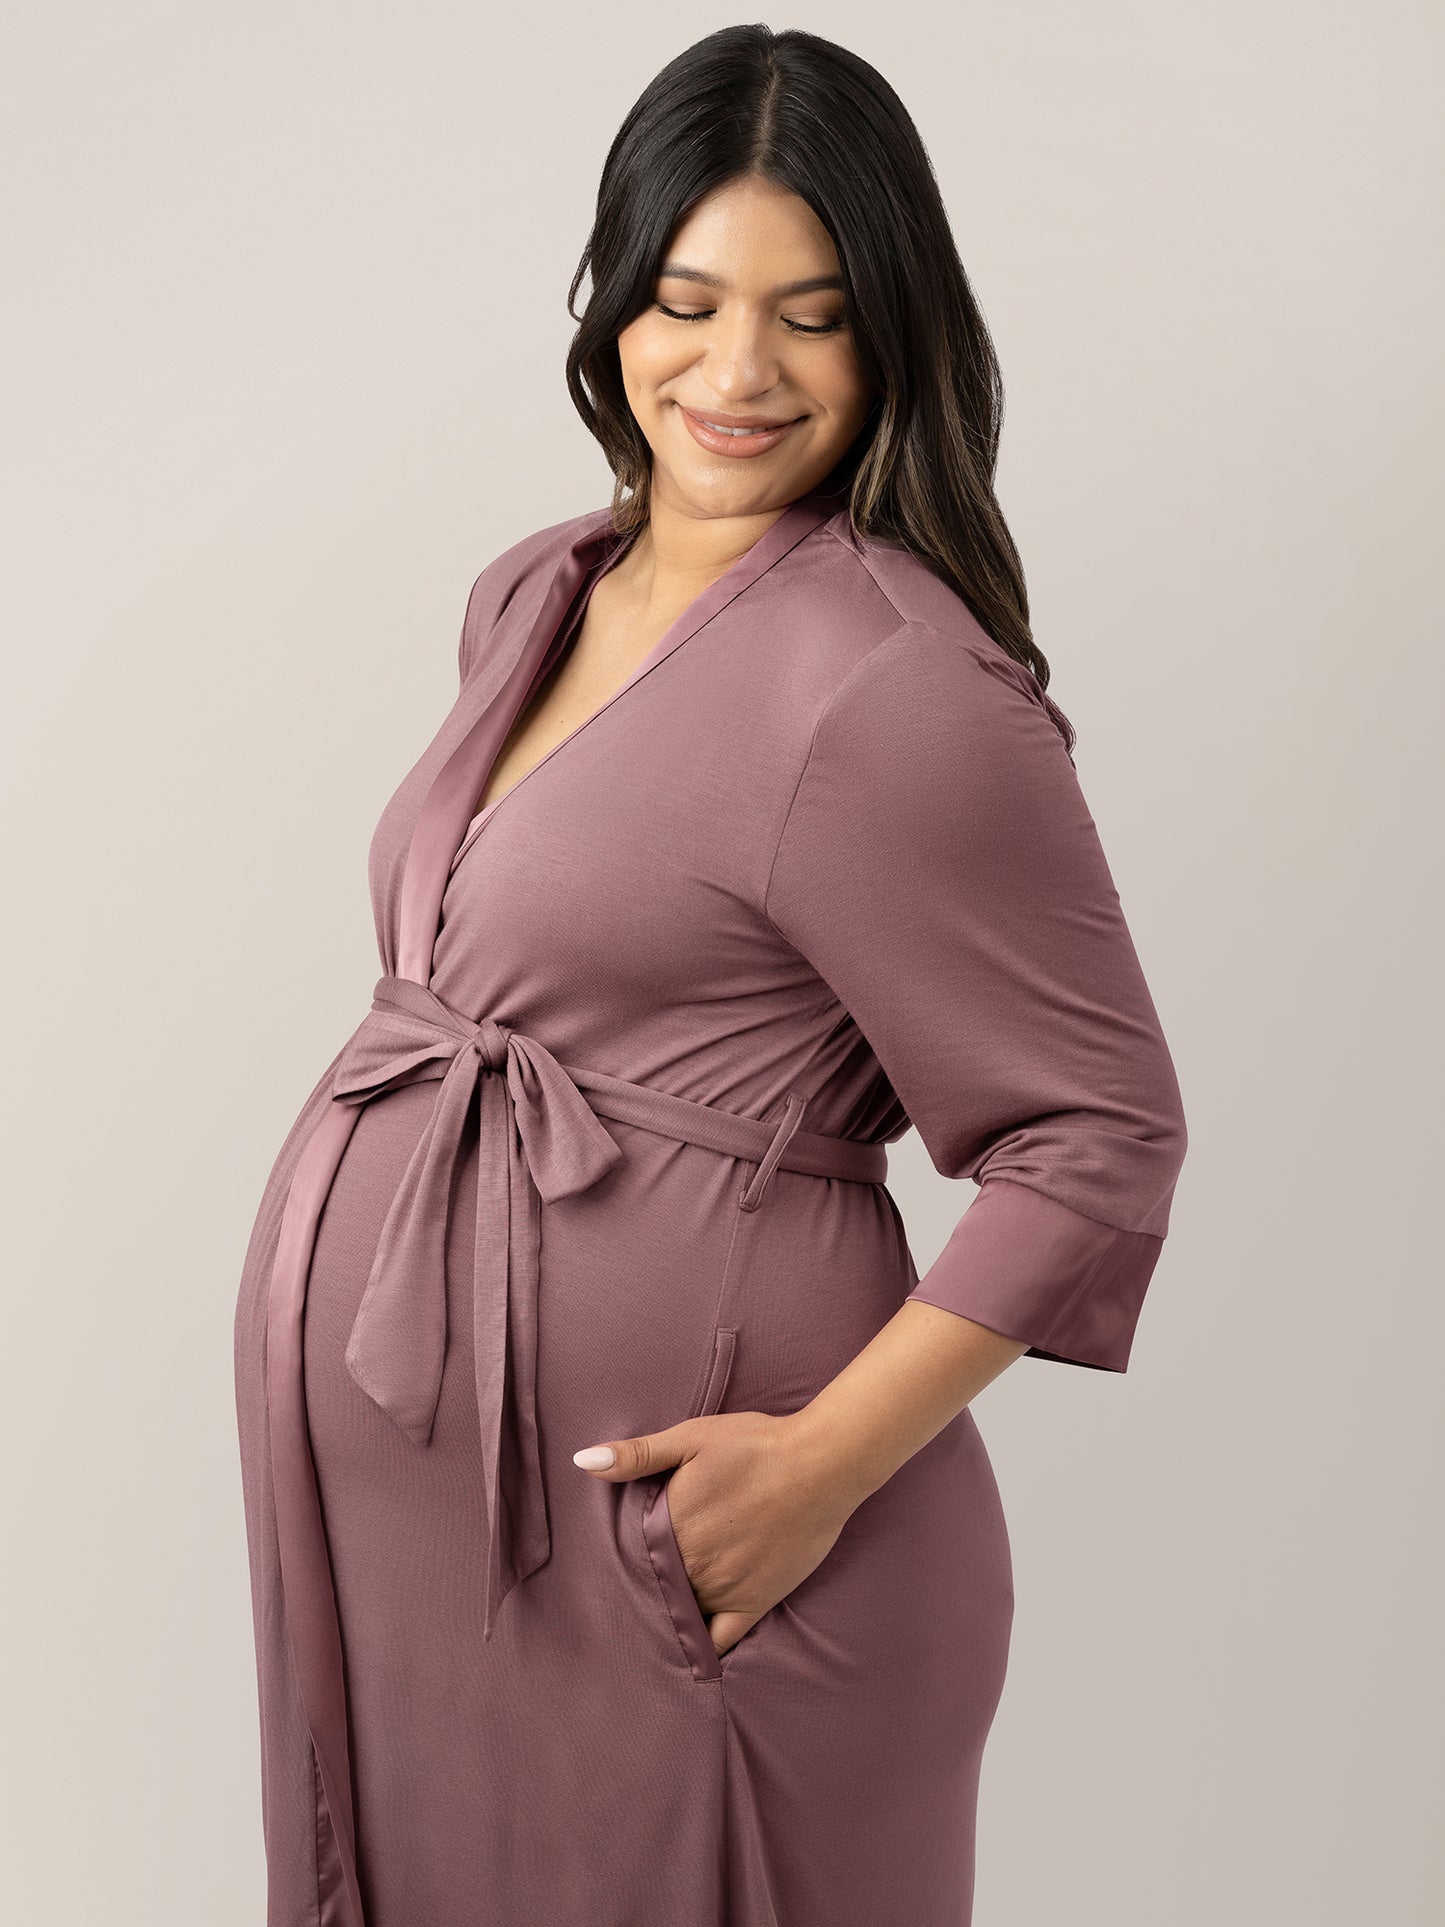 Pregnant model wearing the Emmaline Robe in Twilight with her hands in her pockets.